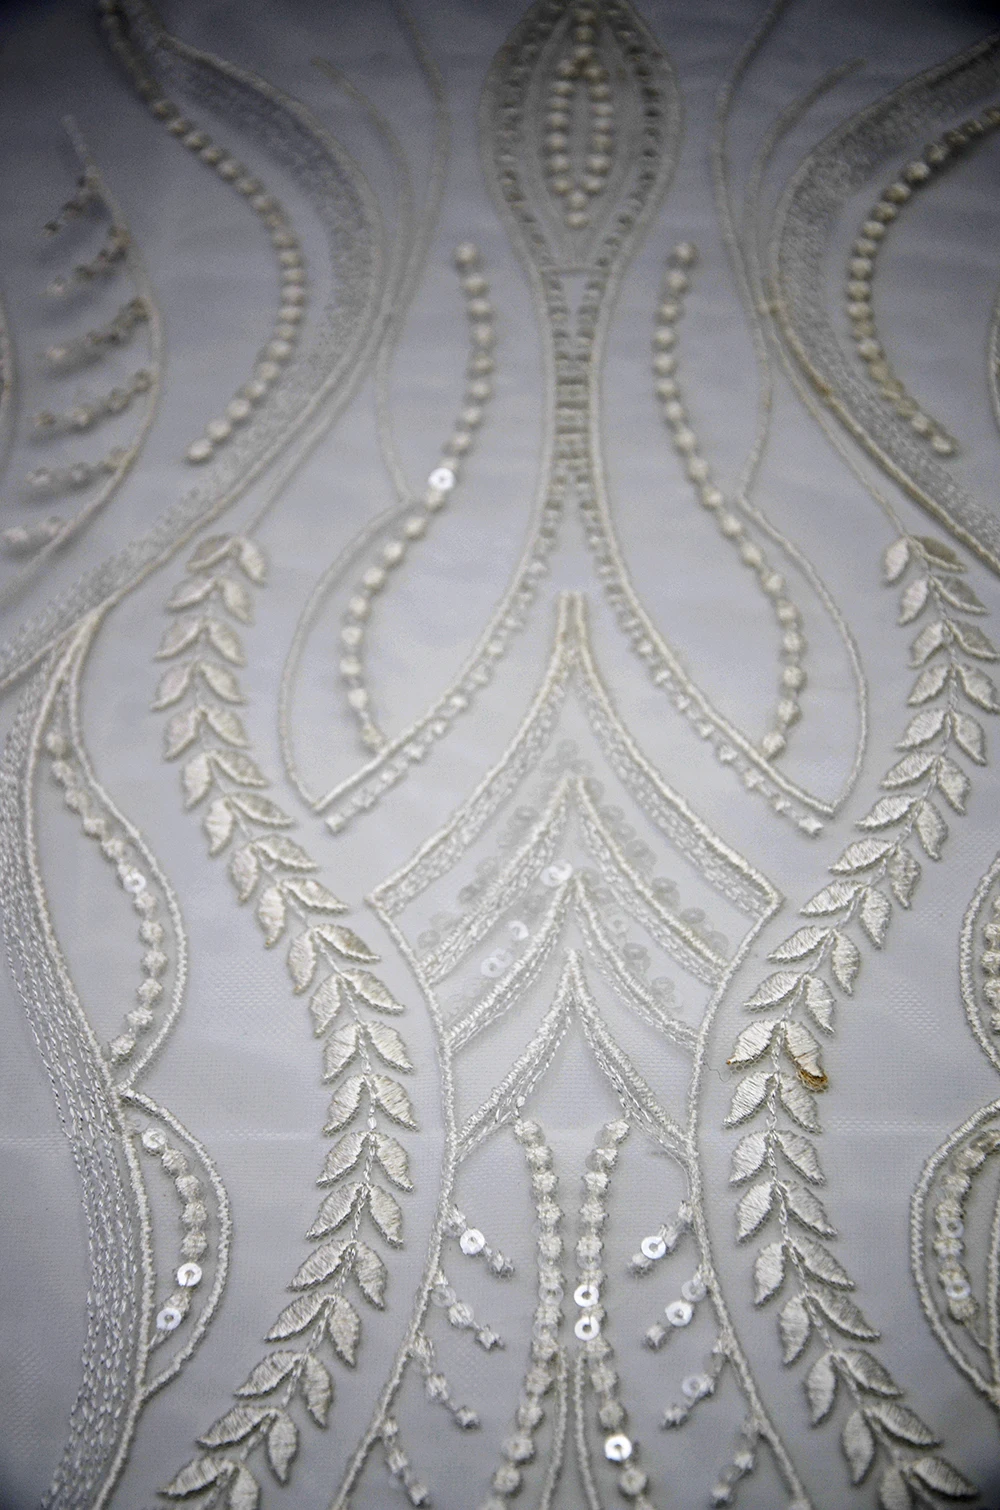 Luxury Wedding Fabric Sequin Tulle Most Popular Wholesale Embroidery Lace Fabric